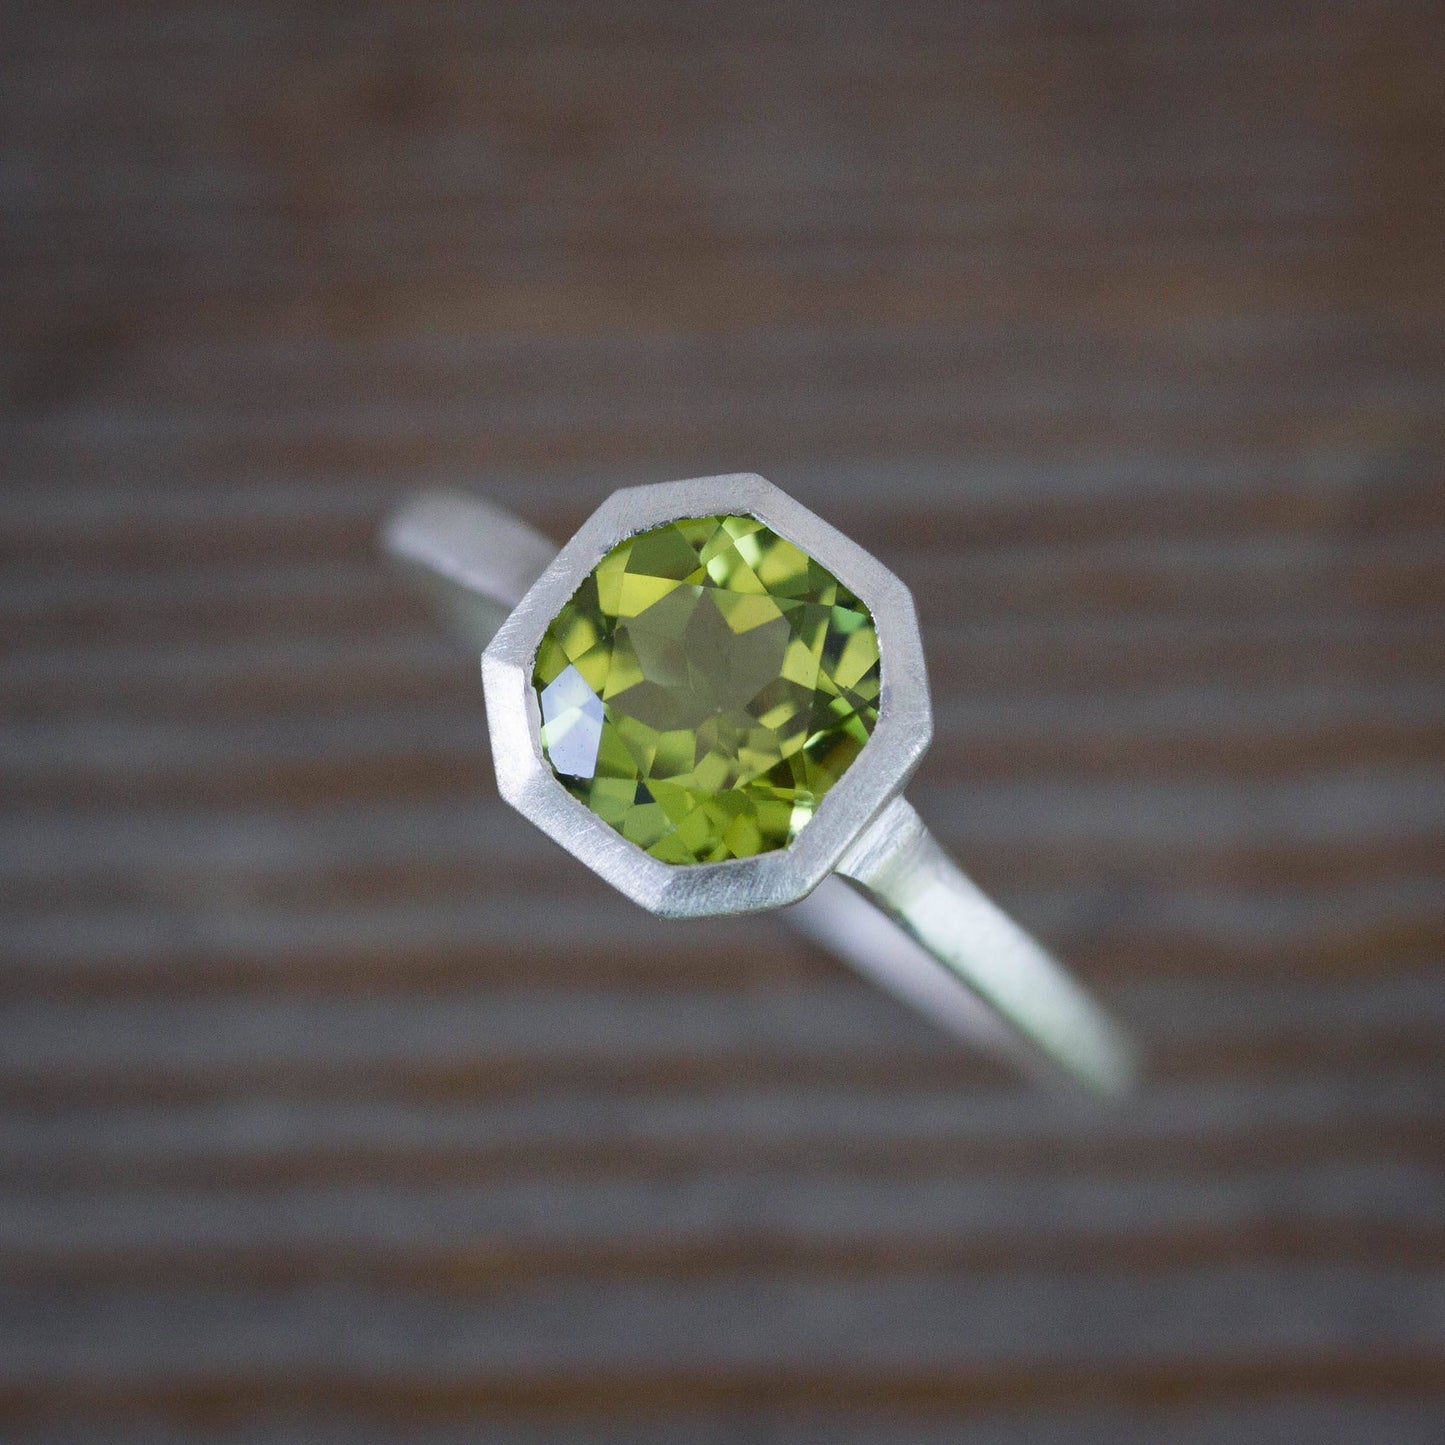 A Peridot Ring in August Birthstone, handmade jewelry set in sterling silver by Cassin Jewelry.